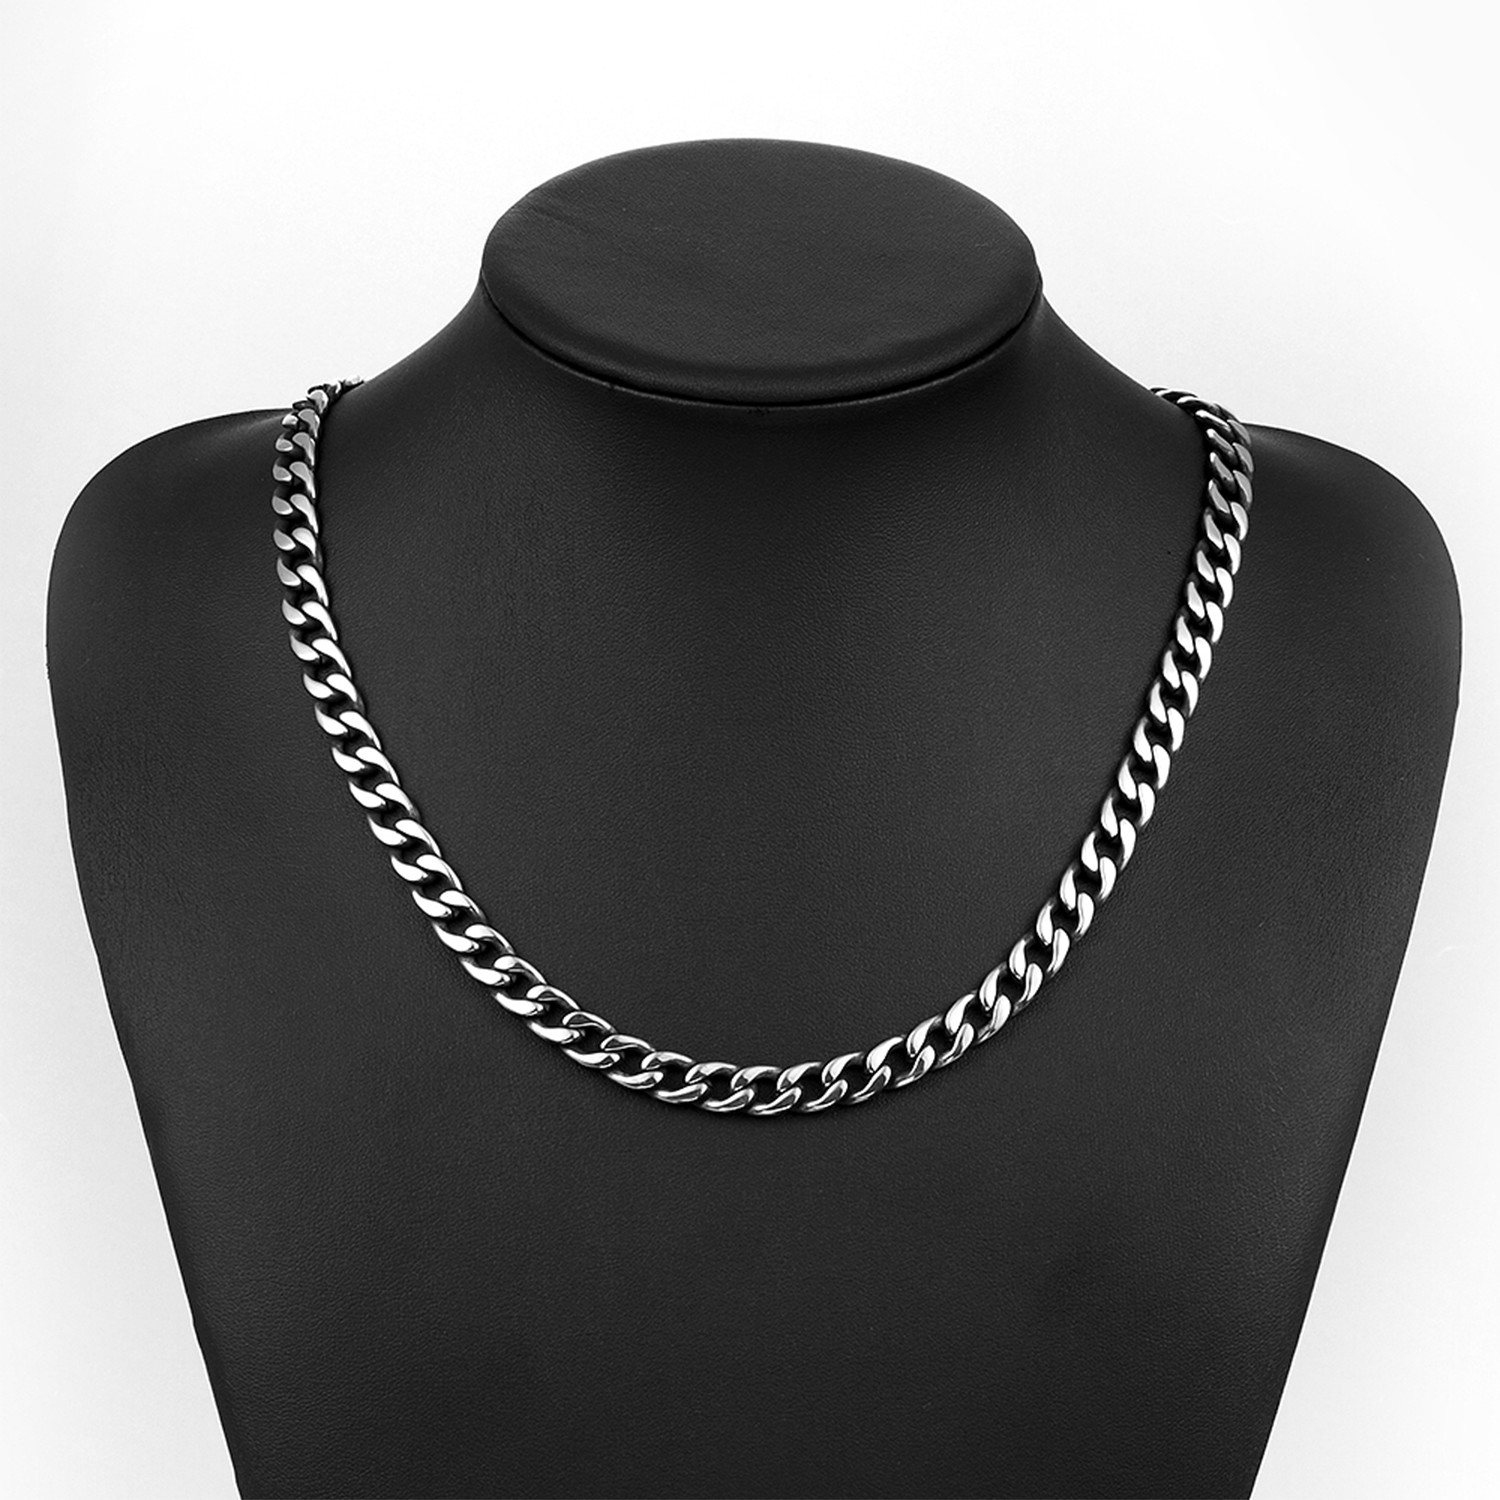 Italian Curb Chain Necklace // Stainless Steel - Rubique Jewelry ...